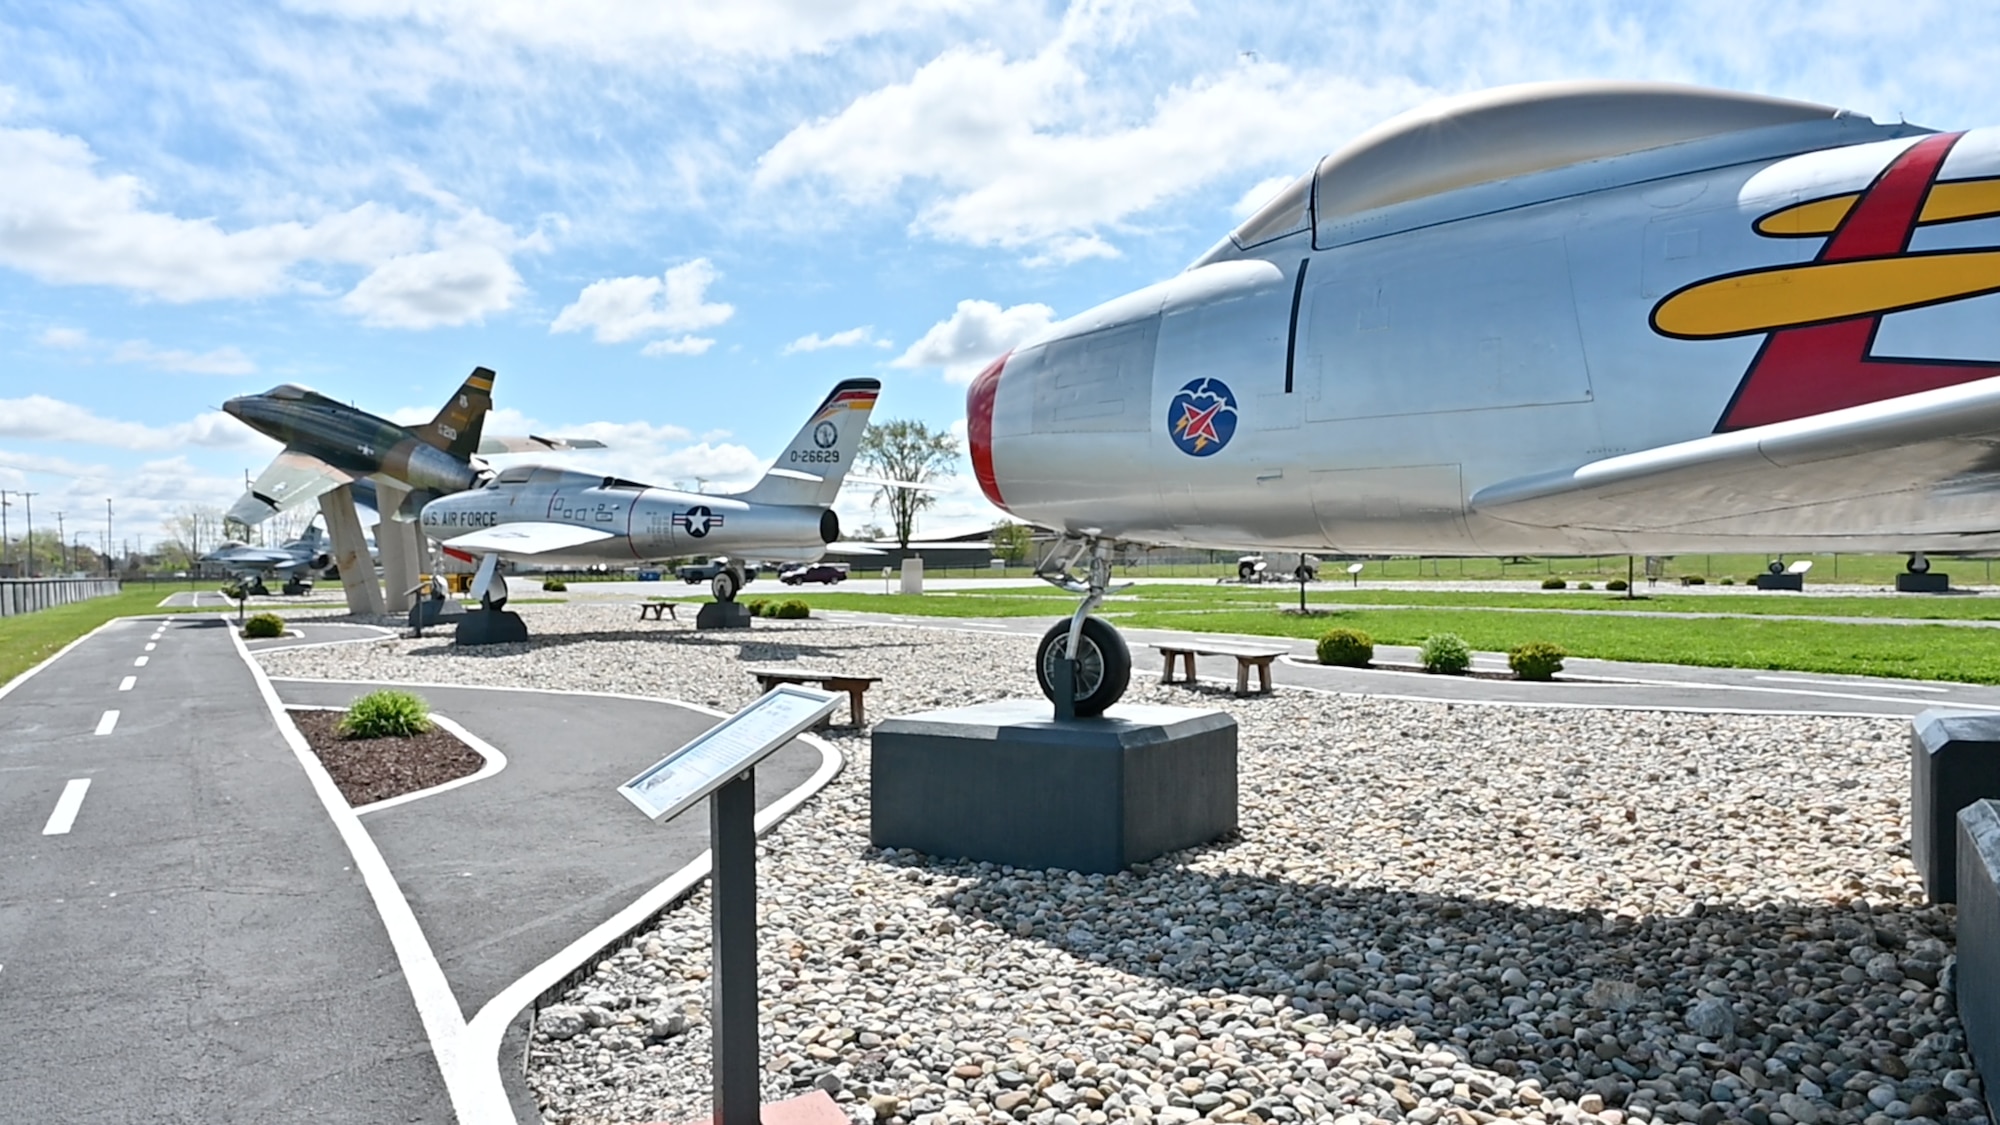 Heritage Park is a private park open to the public to showcase all of the aircraft flown by the 122nd Fighter Wing, Indiana Air National Guard since 1947.